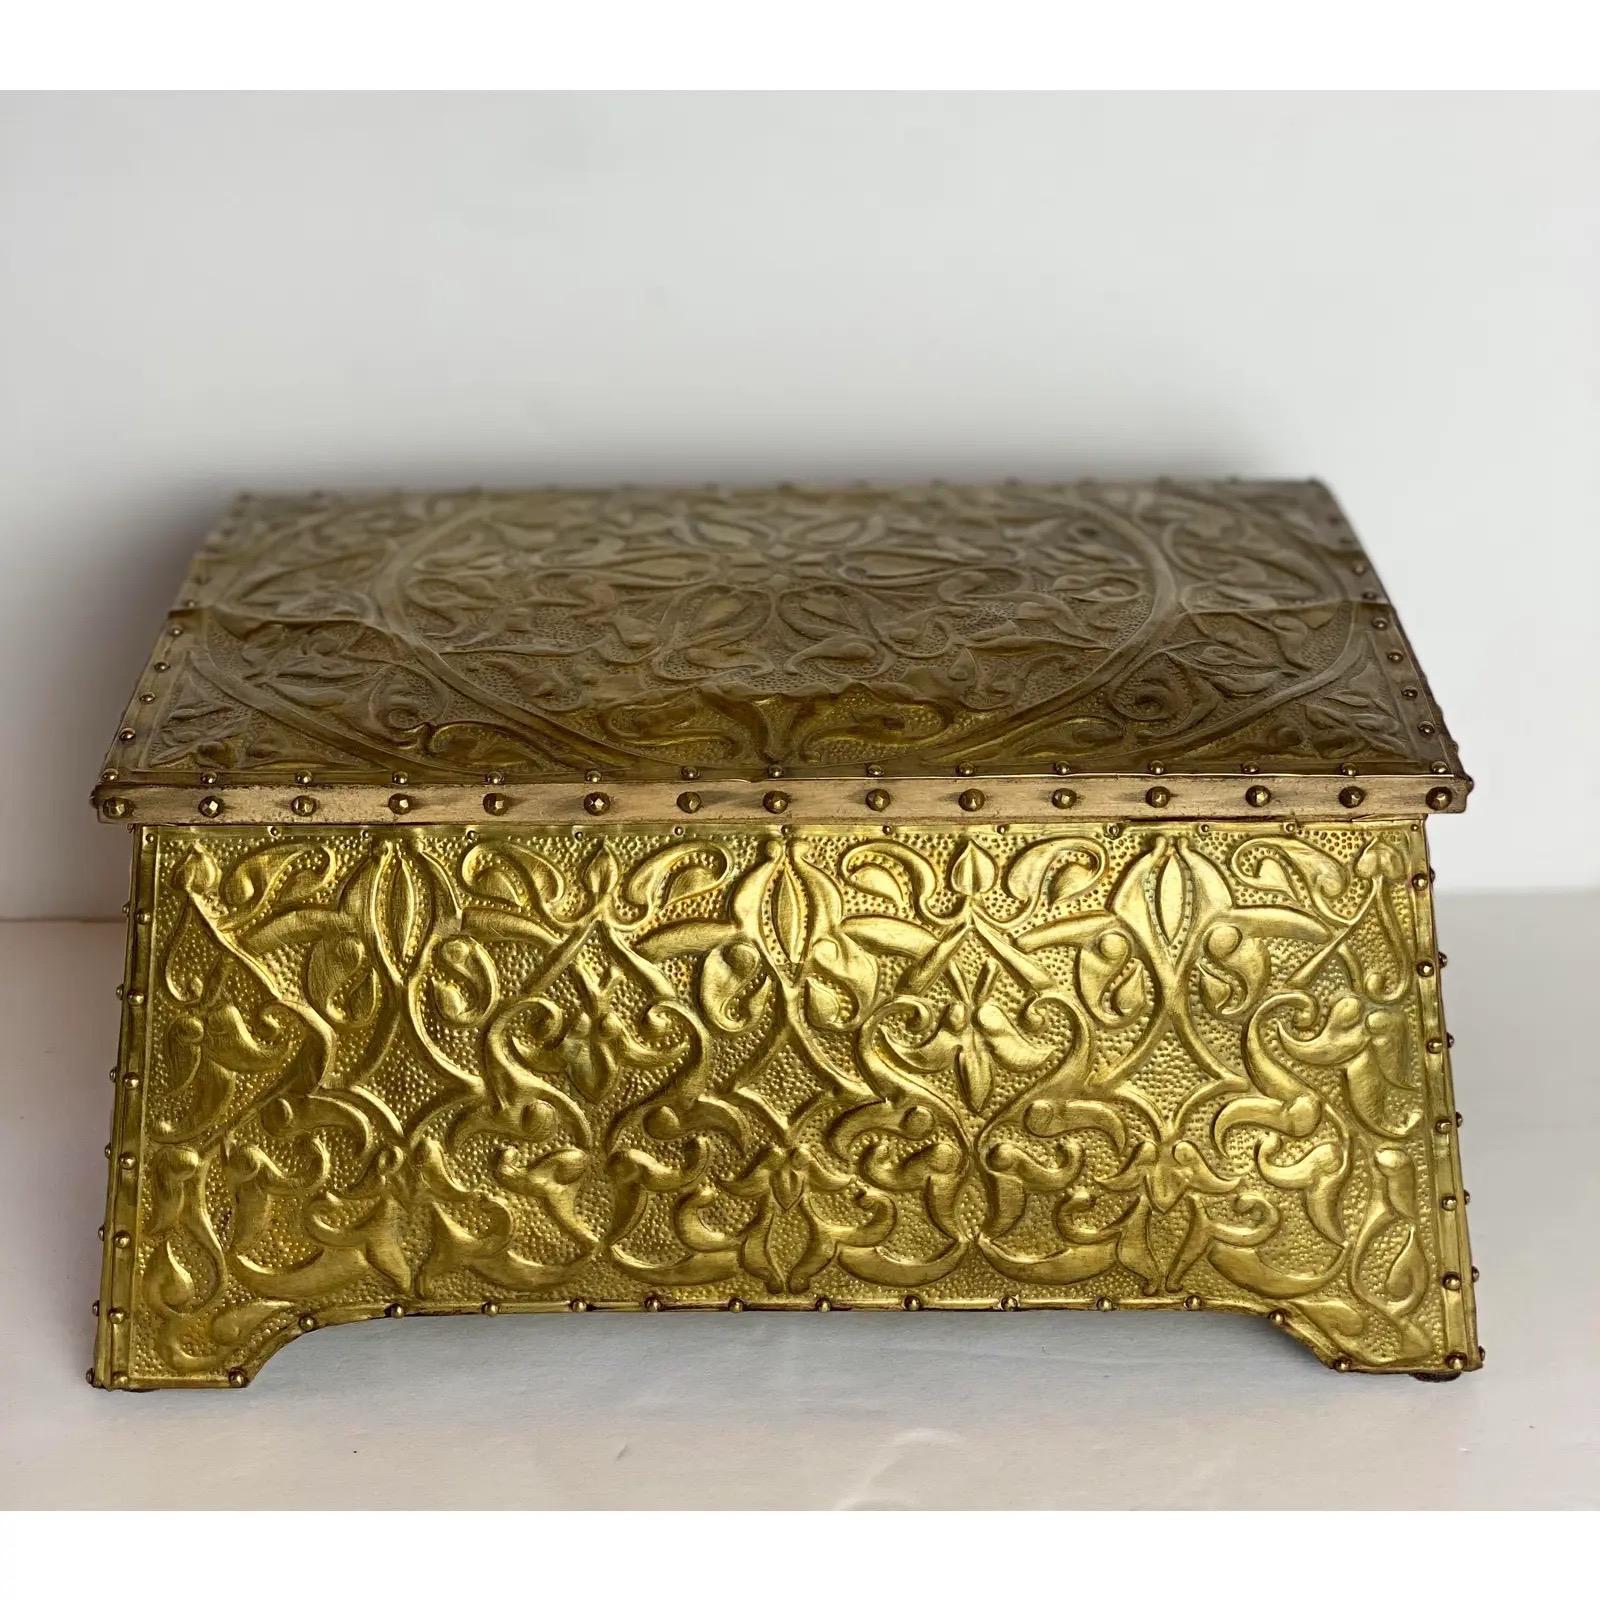 We are very pleased to offer an Old-World brass tin box from England, circa the early 1900s. This sturdy wooden box is richly covered with an embossed brass sheet nailed into place with tiny brass brads. It showcases an ornate Baroque Victorian leaf